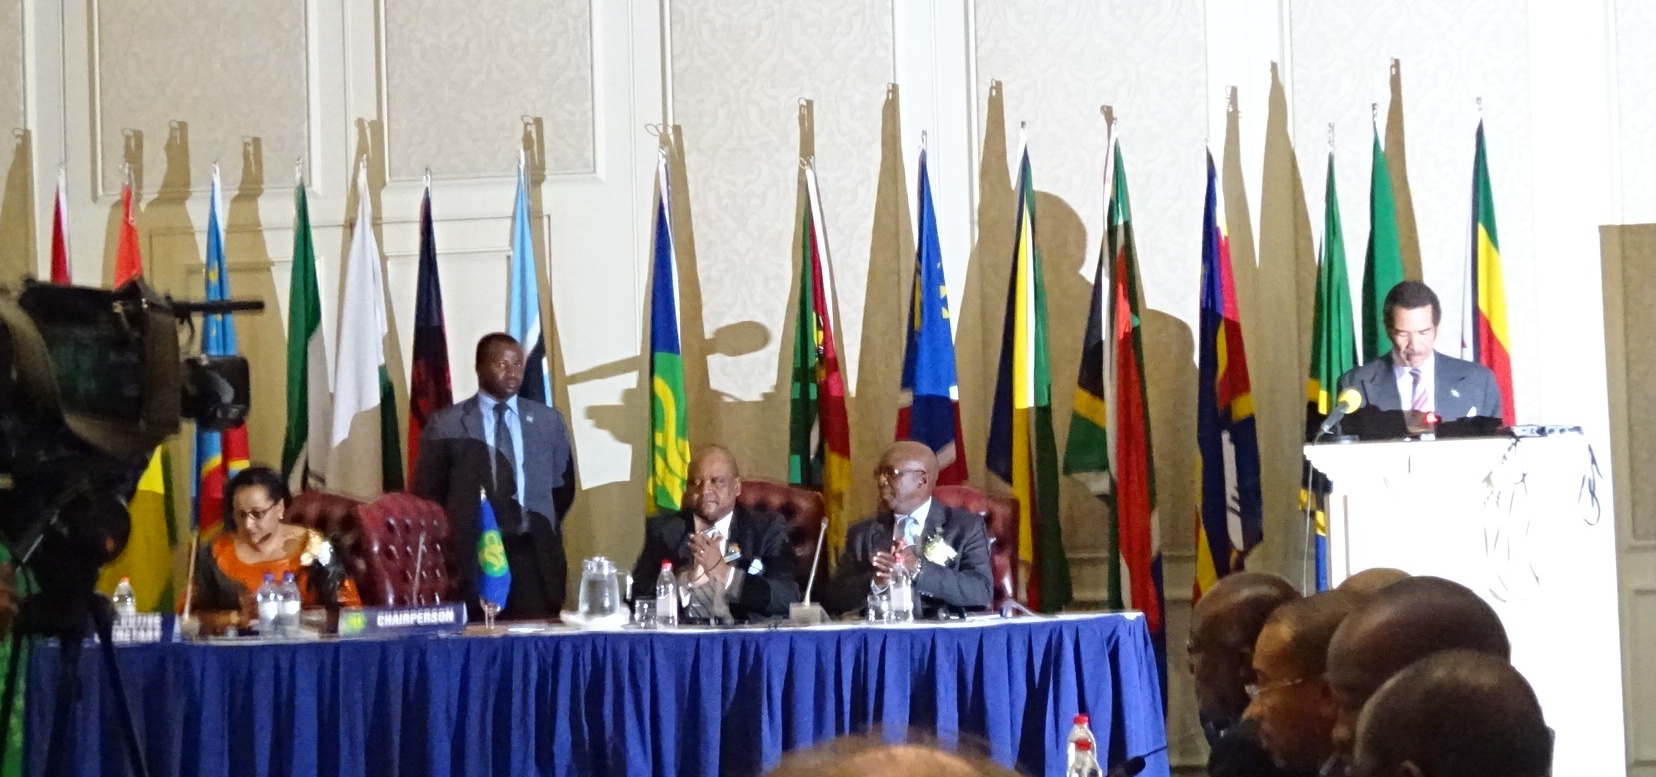 4 In the throes of a major drought, SADC Ministers approves the Agriculture Investment Plan